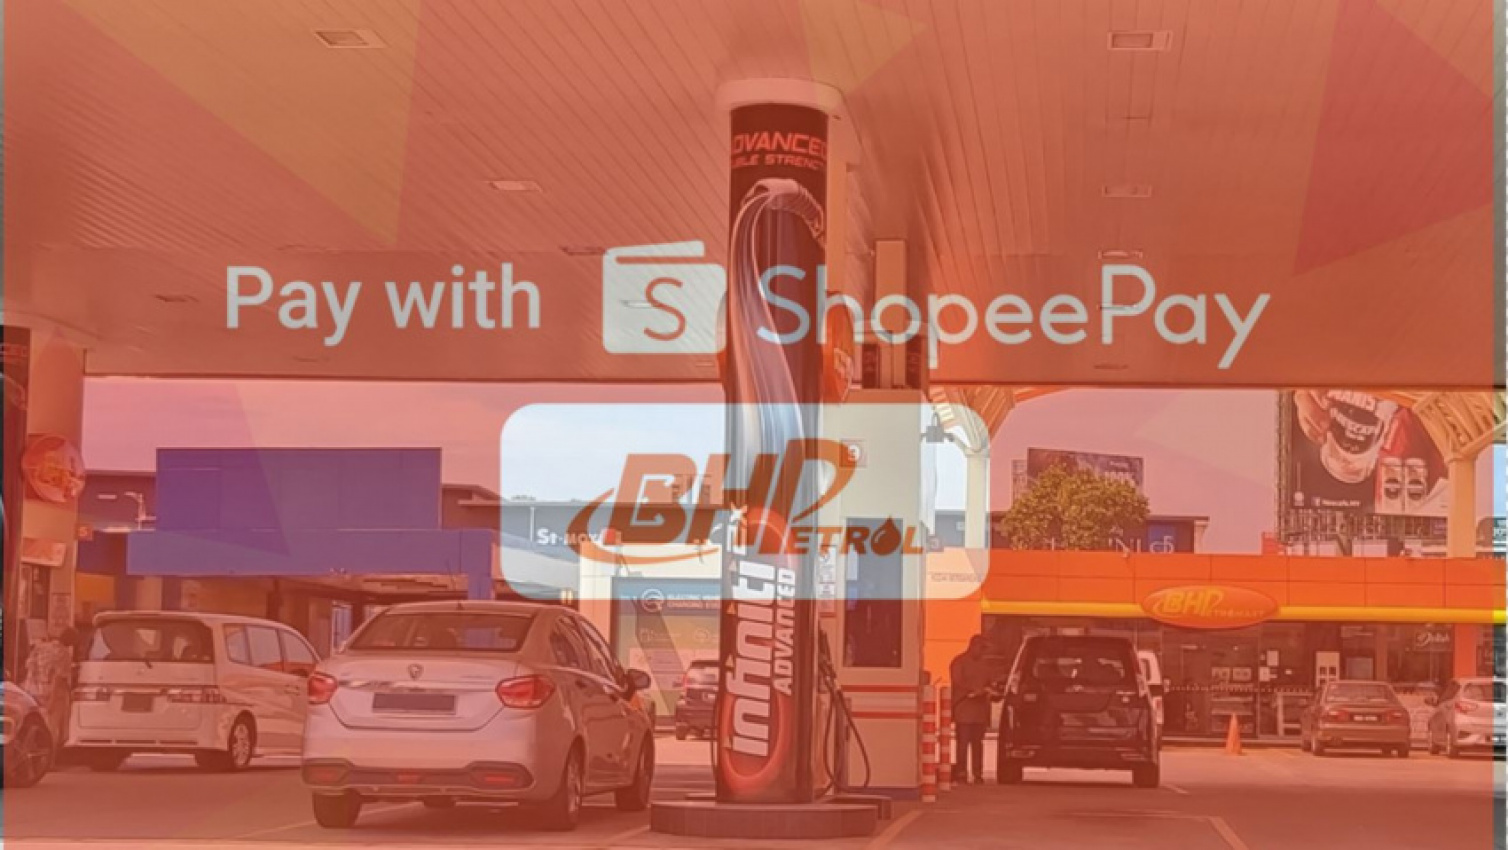 autos, cars, hp, bhpetrol, boustead petroleum marketing, contactless payment, e-wallet, electronic payment, mobile wallet, shopeepay, android, shopeepay mobile wallet now accepted at all bhpetrol stations nationwide